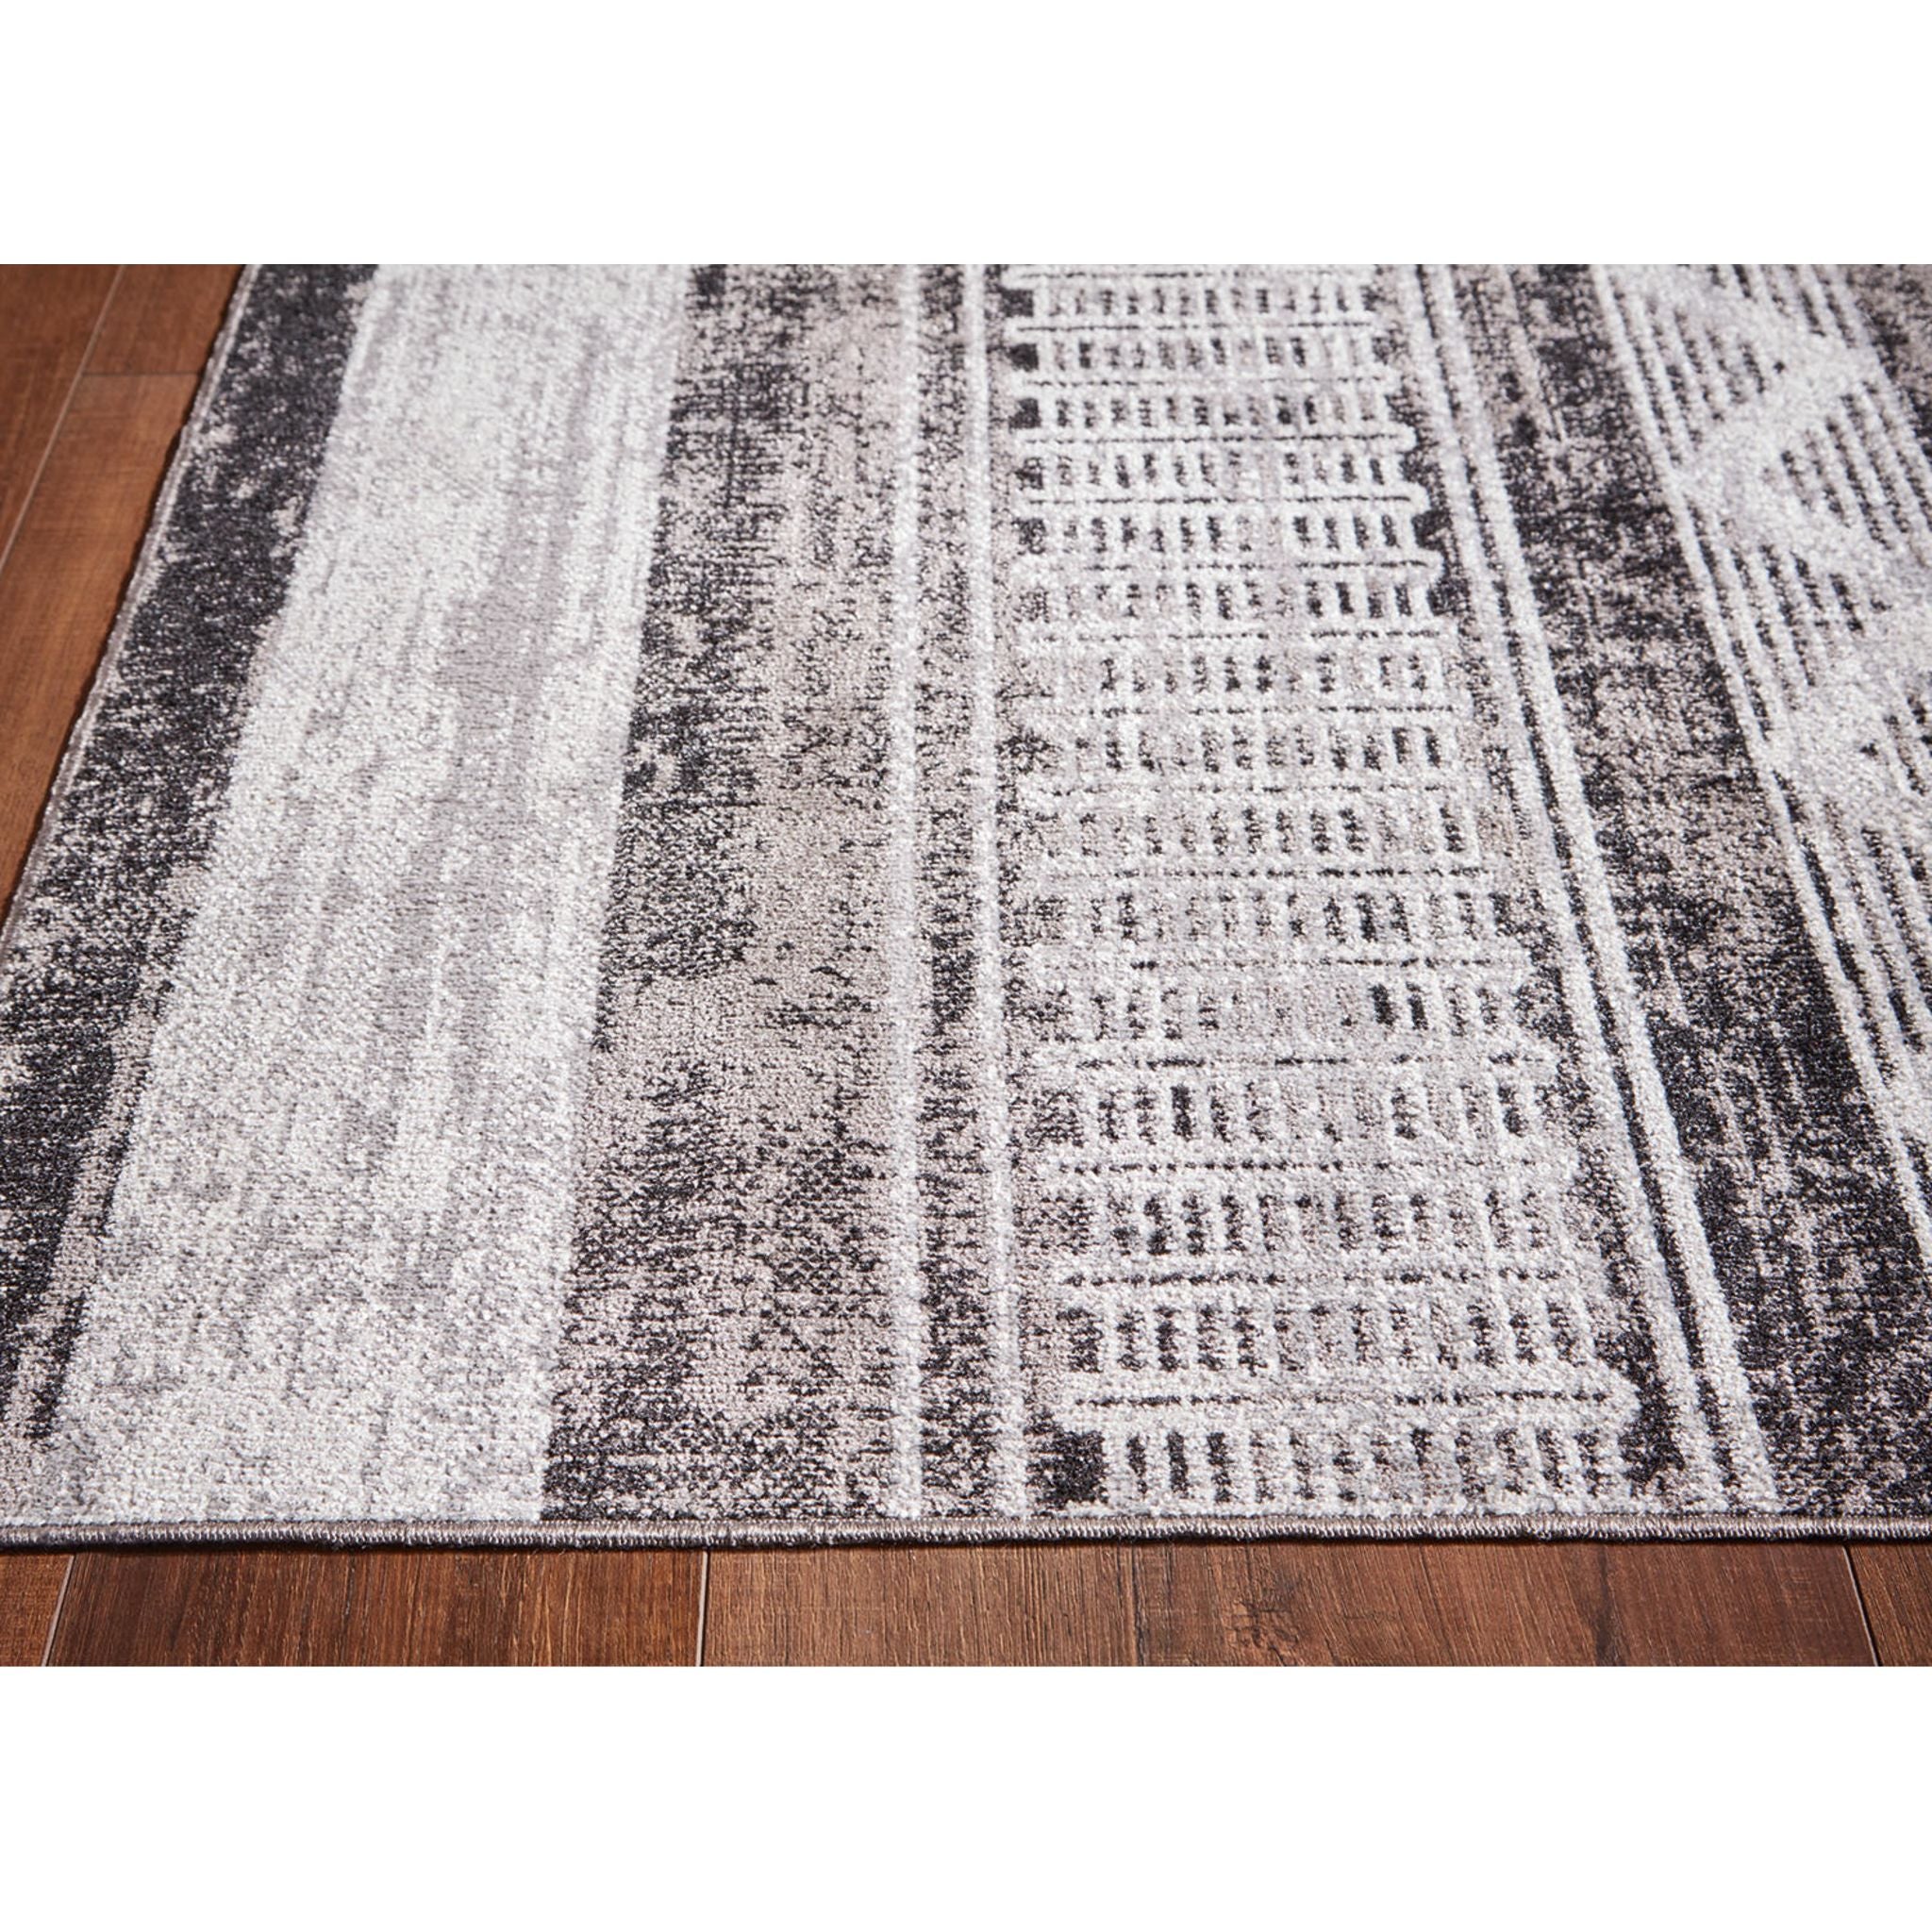 Henchester Area Rug - 5'x7'